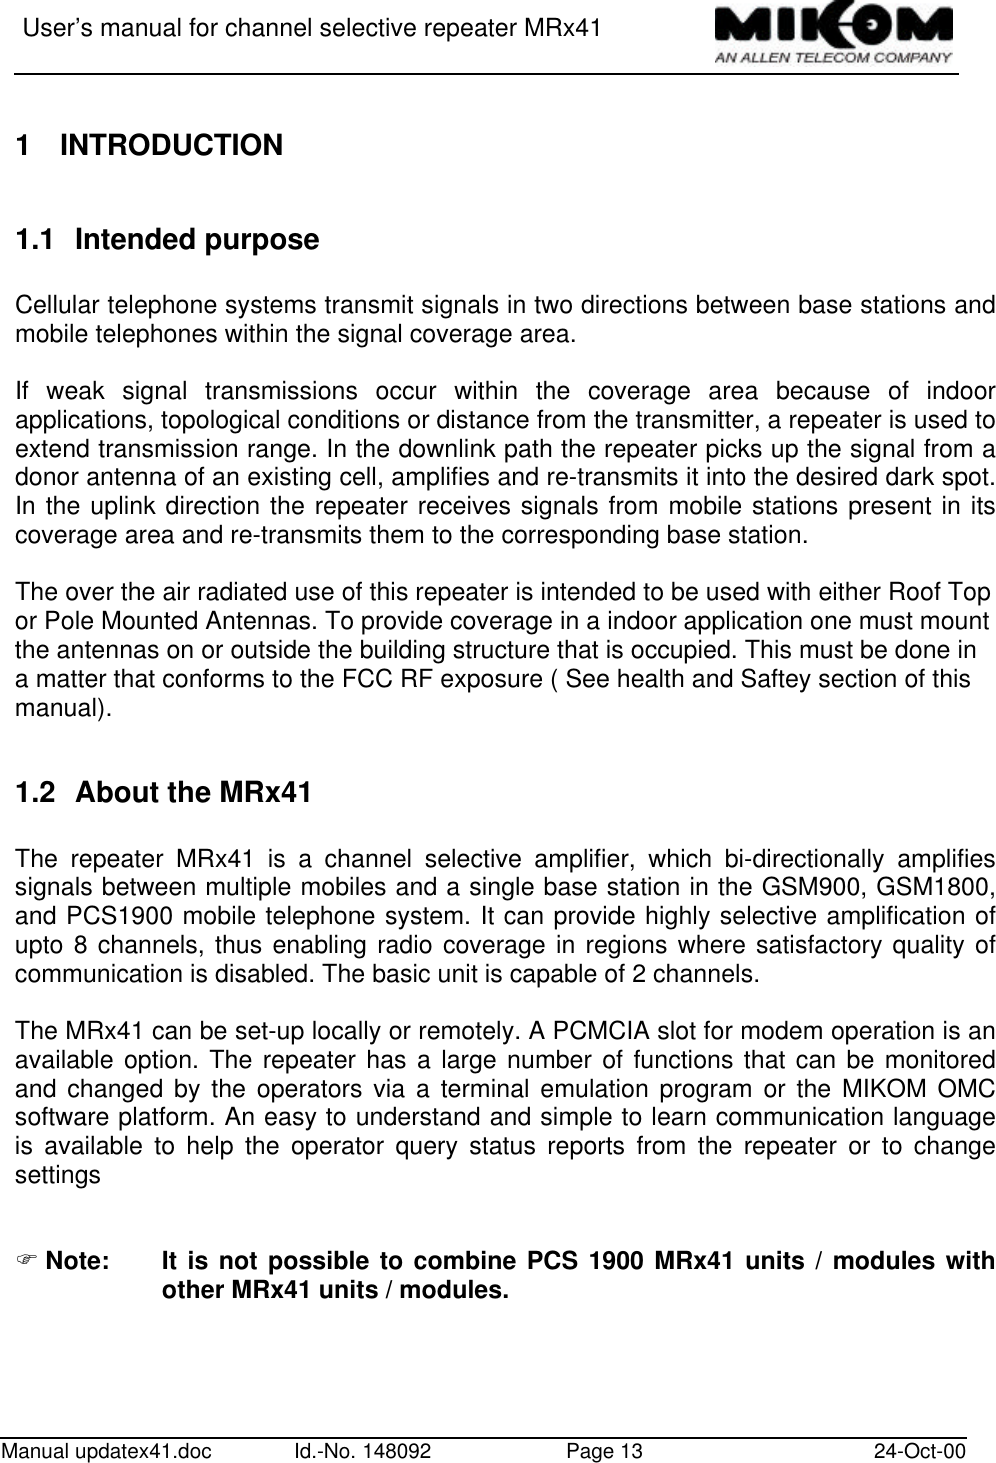 User’s manual for channel selective repeater MRx41Manual updatex41.doc Id.-No. 148092 Page 13 24-Oct-001 INTRODUCTION1.1 Intended purposeCellular telephone systems transmit signals in two directions between base stations andmobile telephones within the signal coverage area.If weak signal transmissions occur within the coverage area because of indoorapplications, topological conditions or distance from the transmitter, a repeater is used toextend transmission range. In the downlink path the repeater picks up the signal from adonor antenna of an existing cell, amplifies and re-transmits it into the desired dark spot.In the uplink direction the repeater receives signals from mobile stations present in itscoverage area and re-transmits them to the corresponding base station.The over the air radiated use of this repeater is intended to be used with either Roof Topor Pole Mounted Antennas. To provide coverage in a indoor application one must mountthe antennas on or outside the building structure that is occupied. This must be done ina matter that conforms to the FCC RF exposure ( See health and Saftey section of thismanual).1.2 About the MRx41The repeater MRx41 is a channel selective amplifier, which bi-directionally amplifiessignals between multiple mobiles and a single base station in the GSM900, GSM1800,and PCS1900 mobile telephone system. It can provide highly selective amplification ofupto 8 channels, thus enabling radio coverage in regions where satisfactory quality ofcommunication is disabled. The basic unit is capable of 2 channels.The MRx41 can be set-up locally or remotely. A PCMCIA slot for modem operation is anavailable option. The repeater has a large number of functions that can be monitoredand changed by the operators via a terminal emulation program or the MIKOM OMCsoftware platform. An easy to understand and simple to learn communication languageis available to help the operator query status reports from the repeater or to changesettingsF Note: It is not possible to combine PCS 1900 MRx41 units / modules withother MRx41 units / modules.